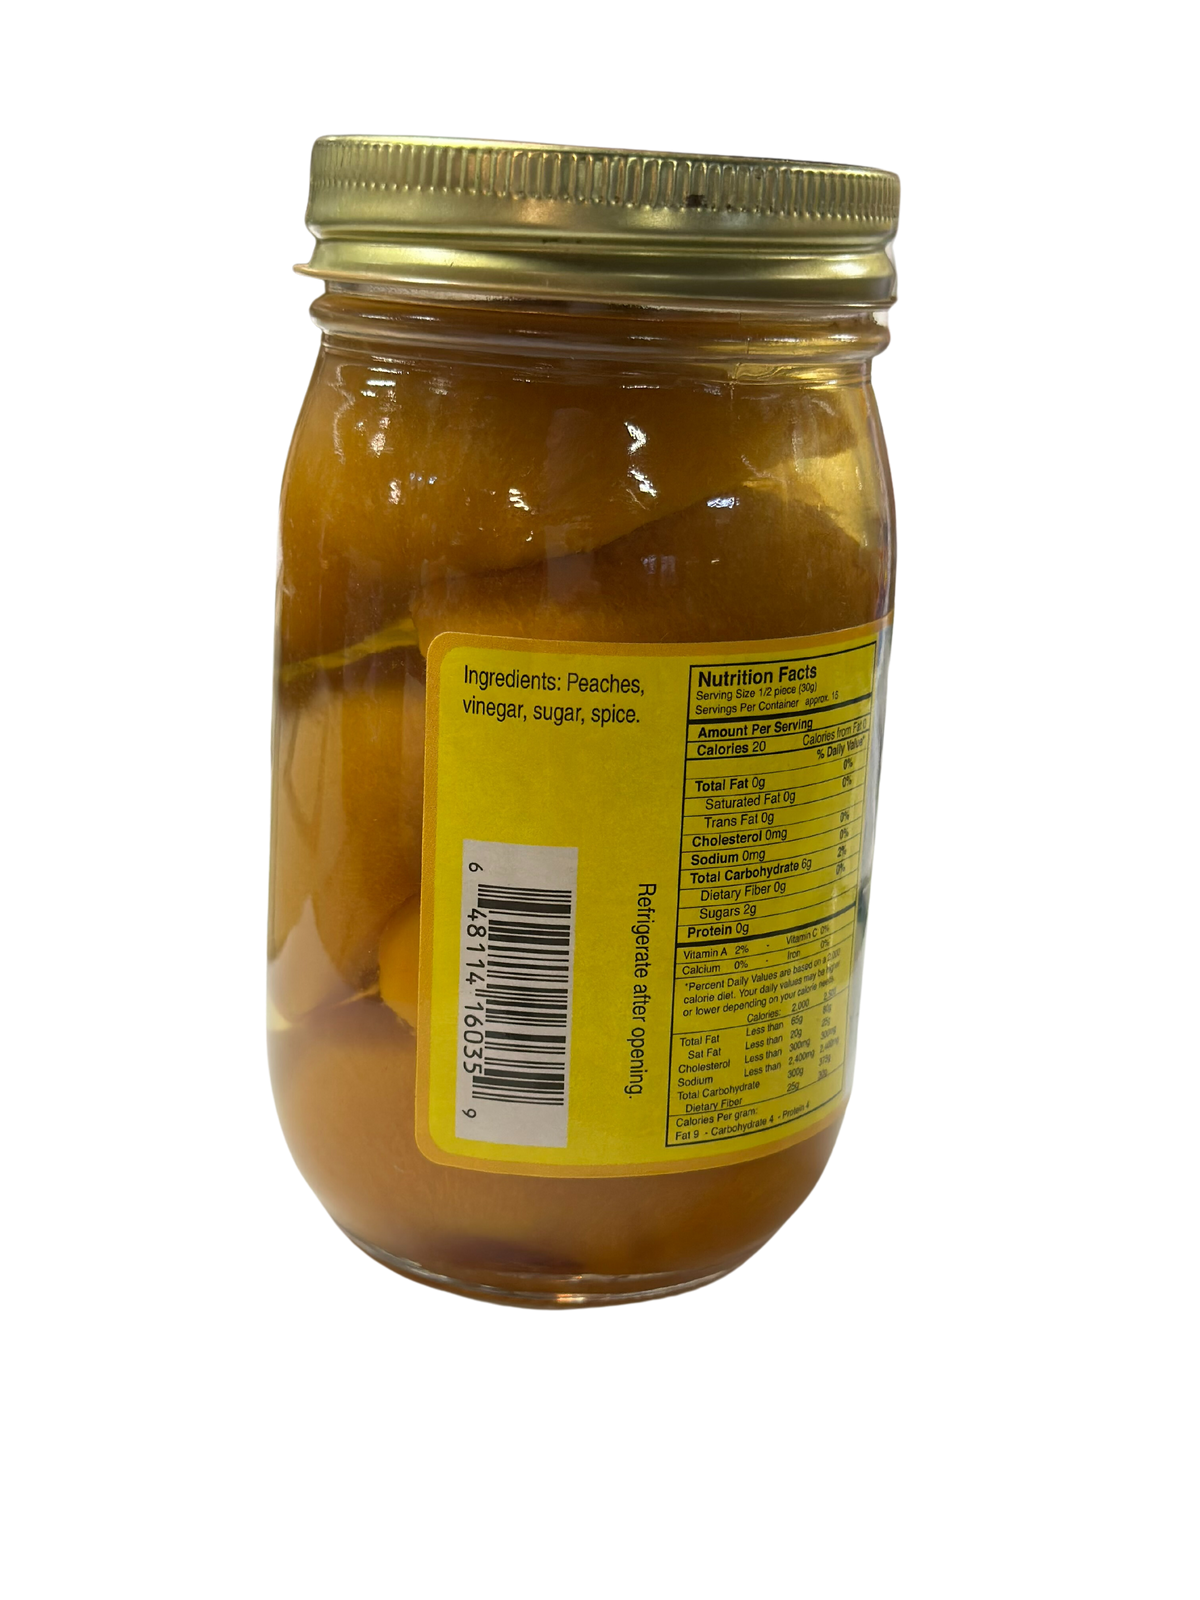 Spring Valley Farms Spiced Pickled Peaches